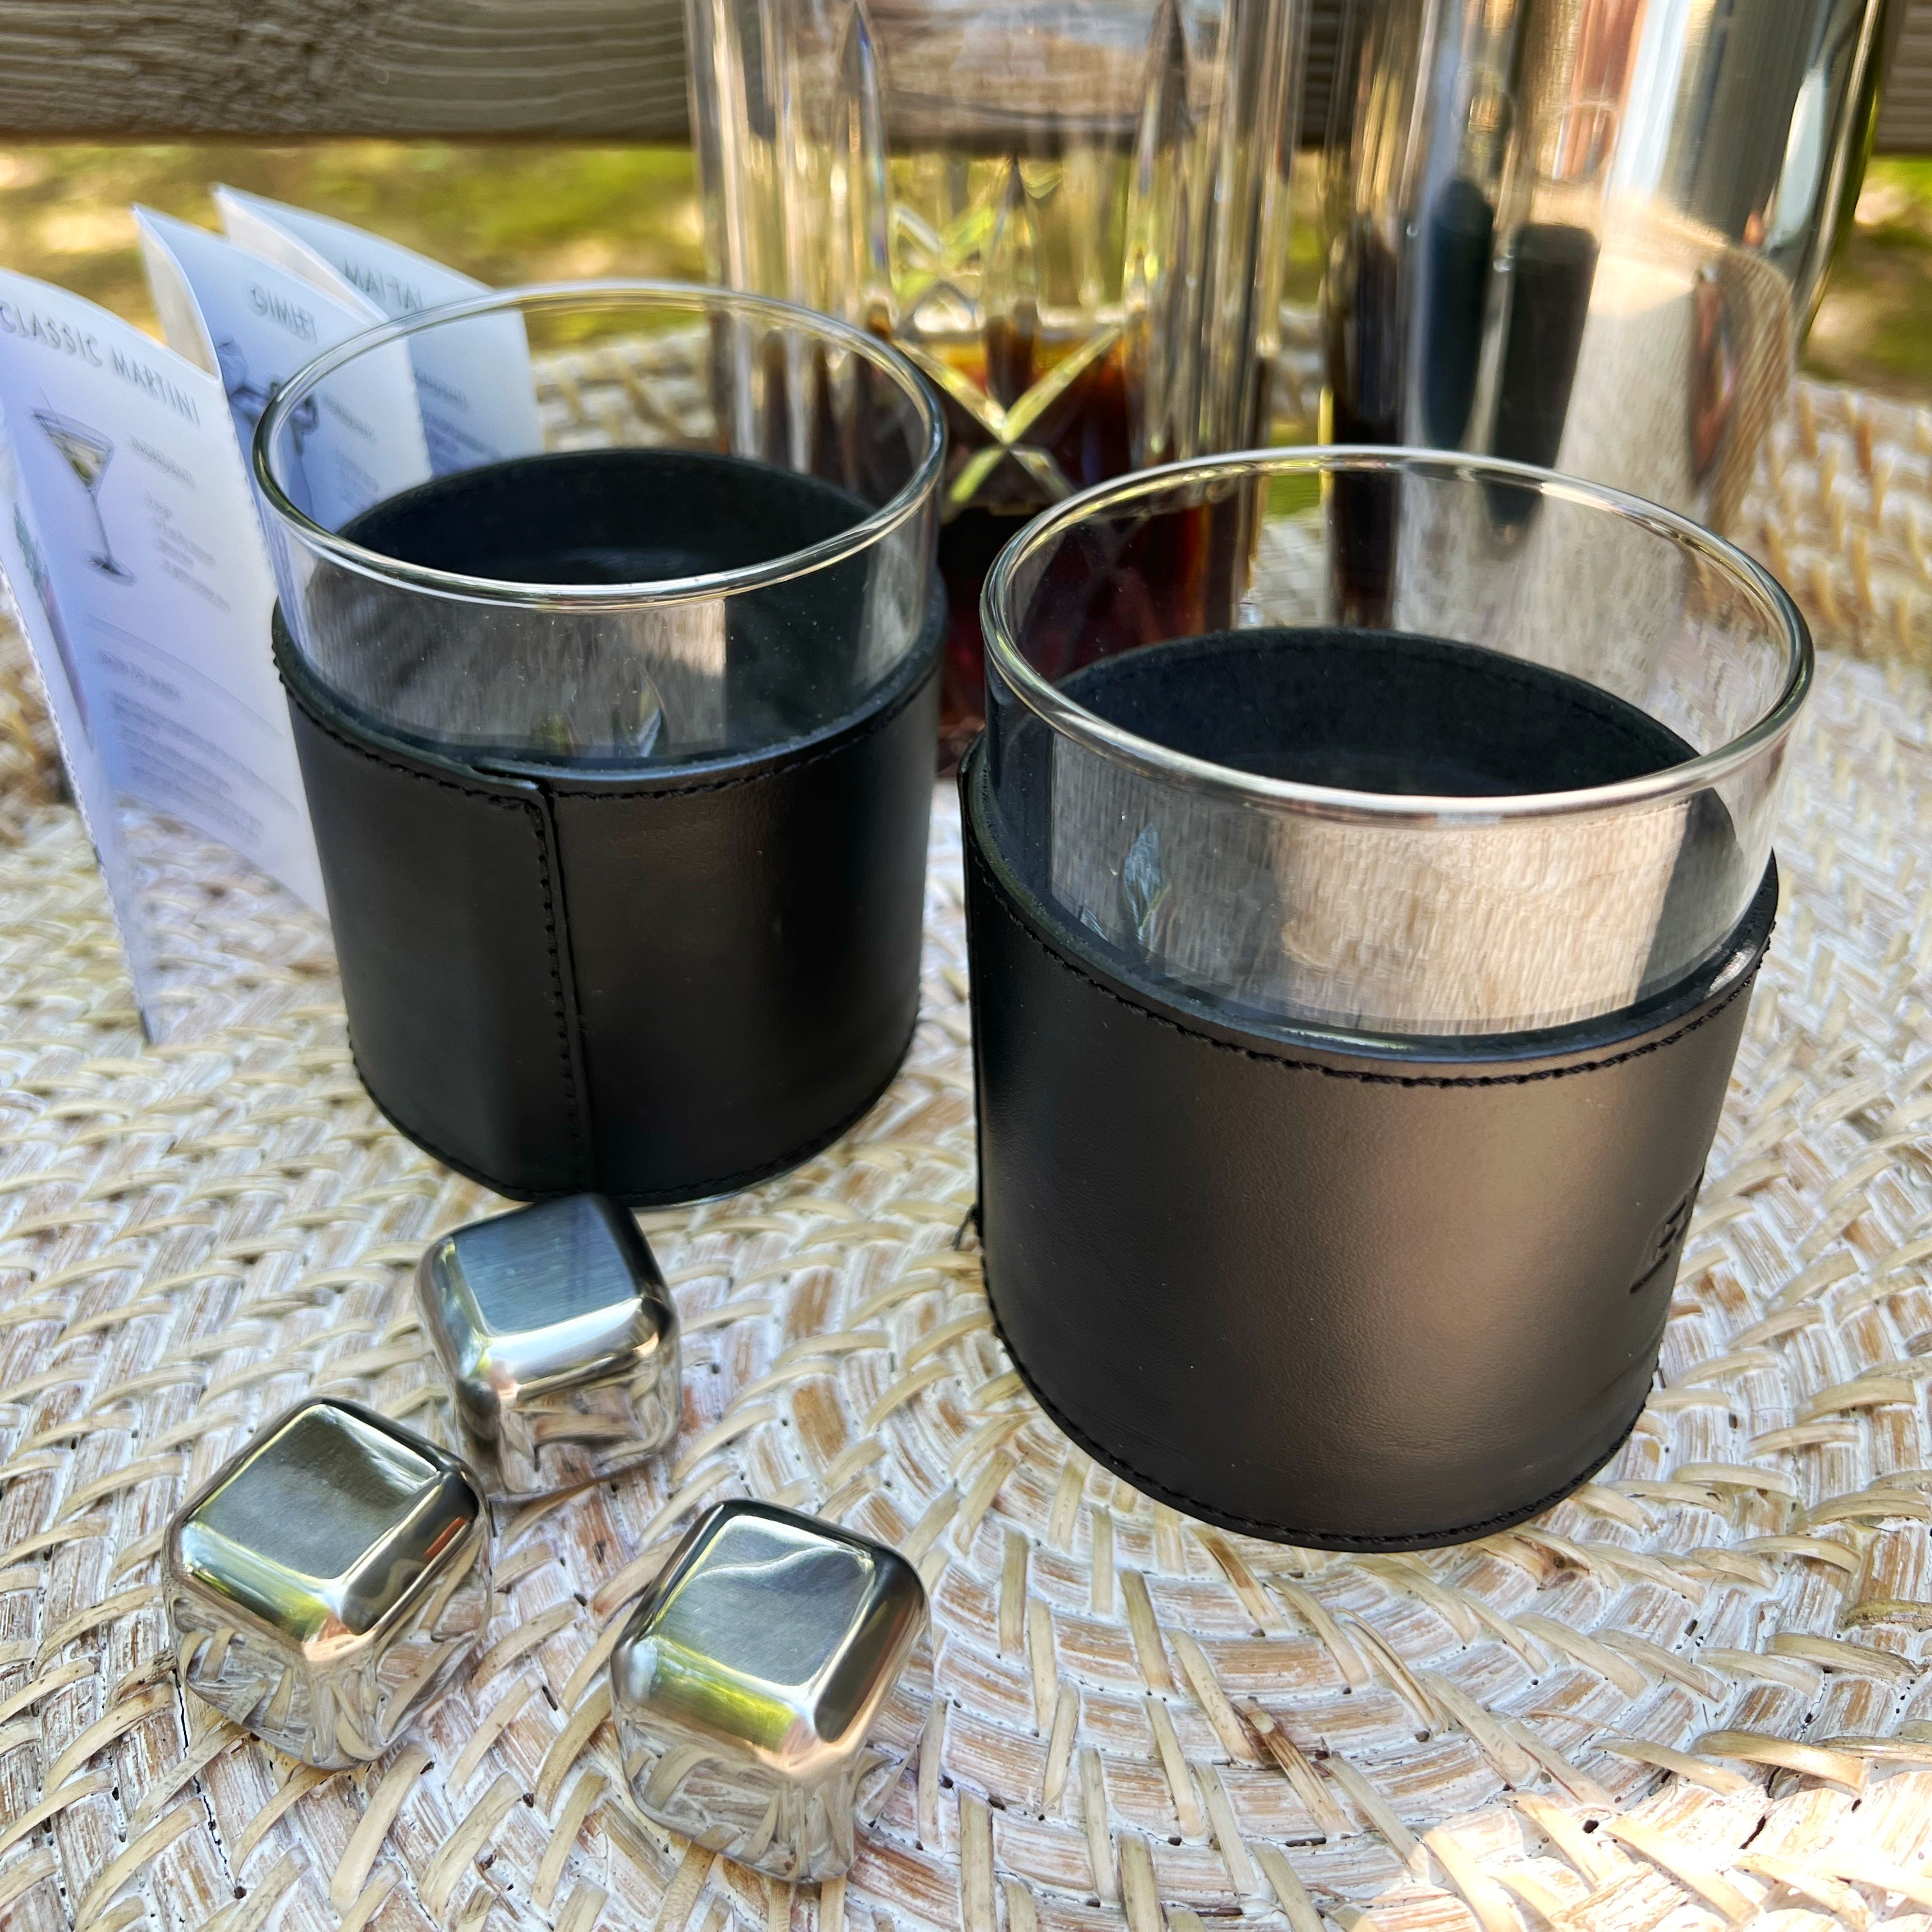 20 Professional Corporate Gifts Idea Under $100 | Leather Wrapped Rocks Glasses